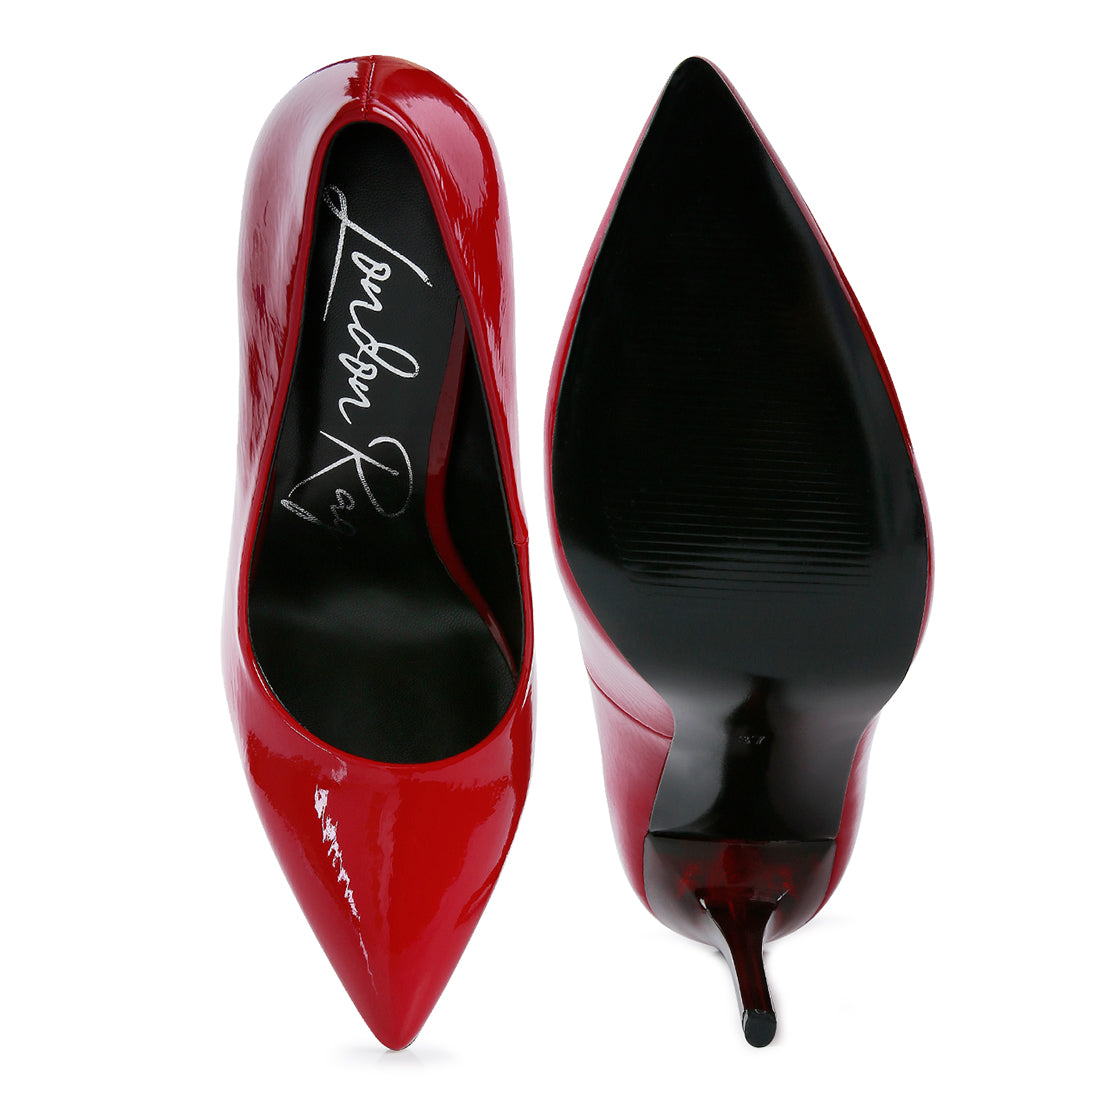 high heels pumps shoes#color_red